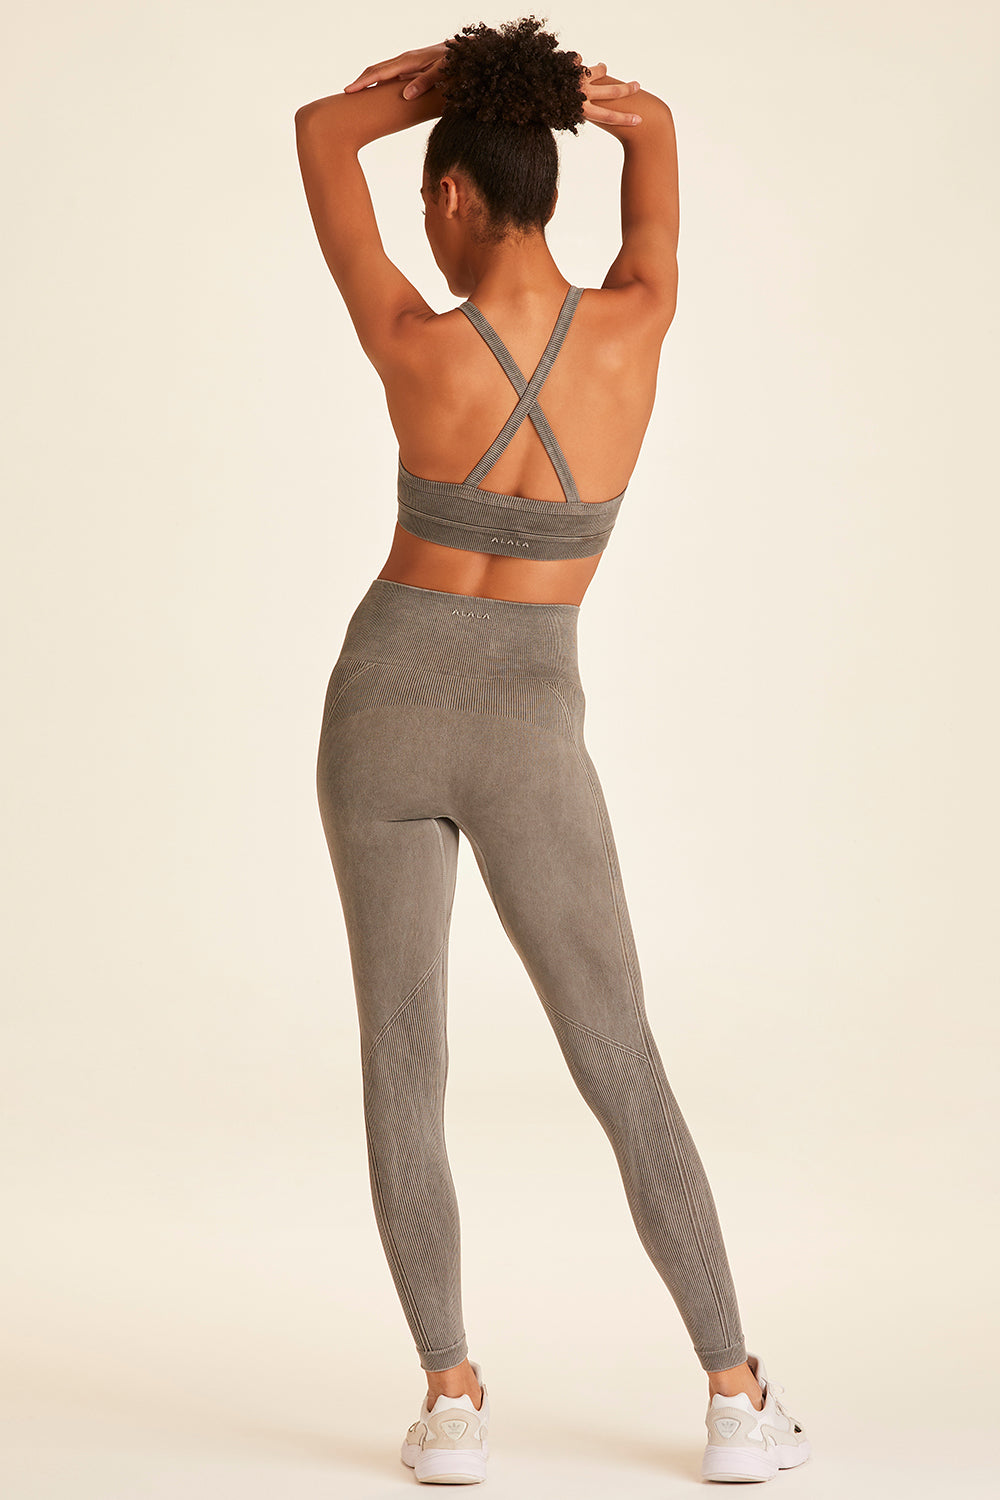 Barre Seamless Tight - Tracy Anderson